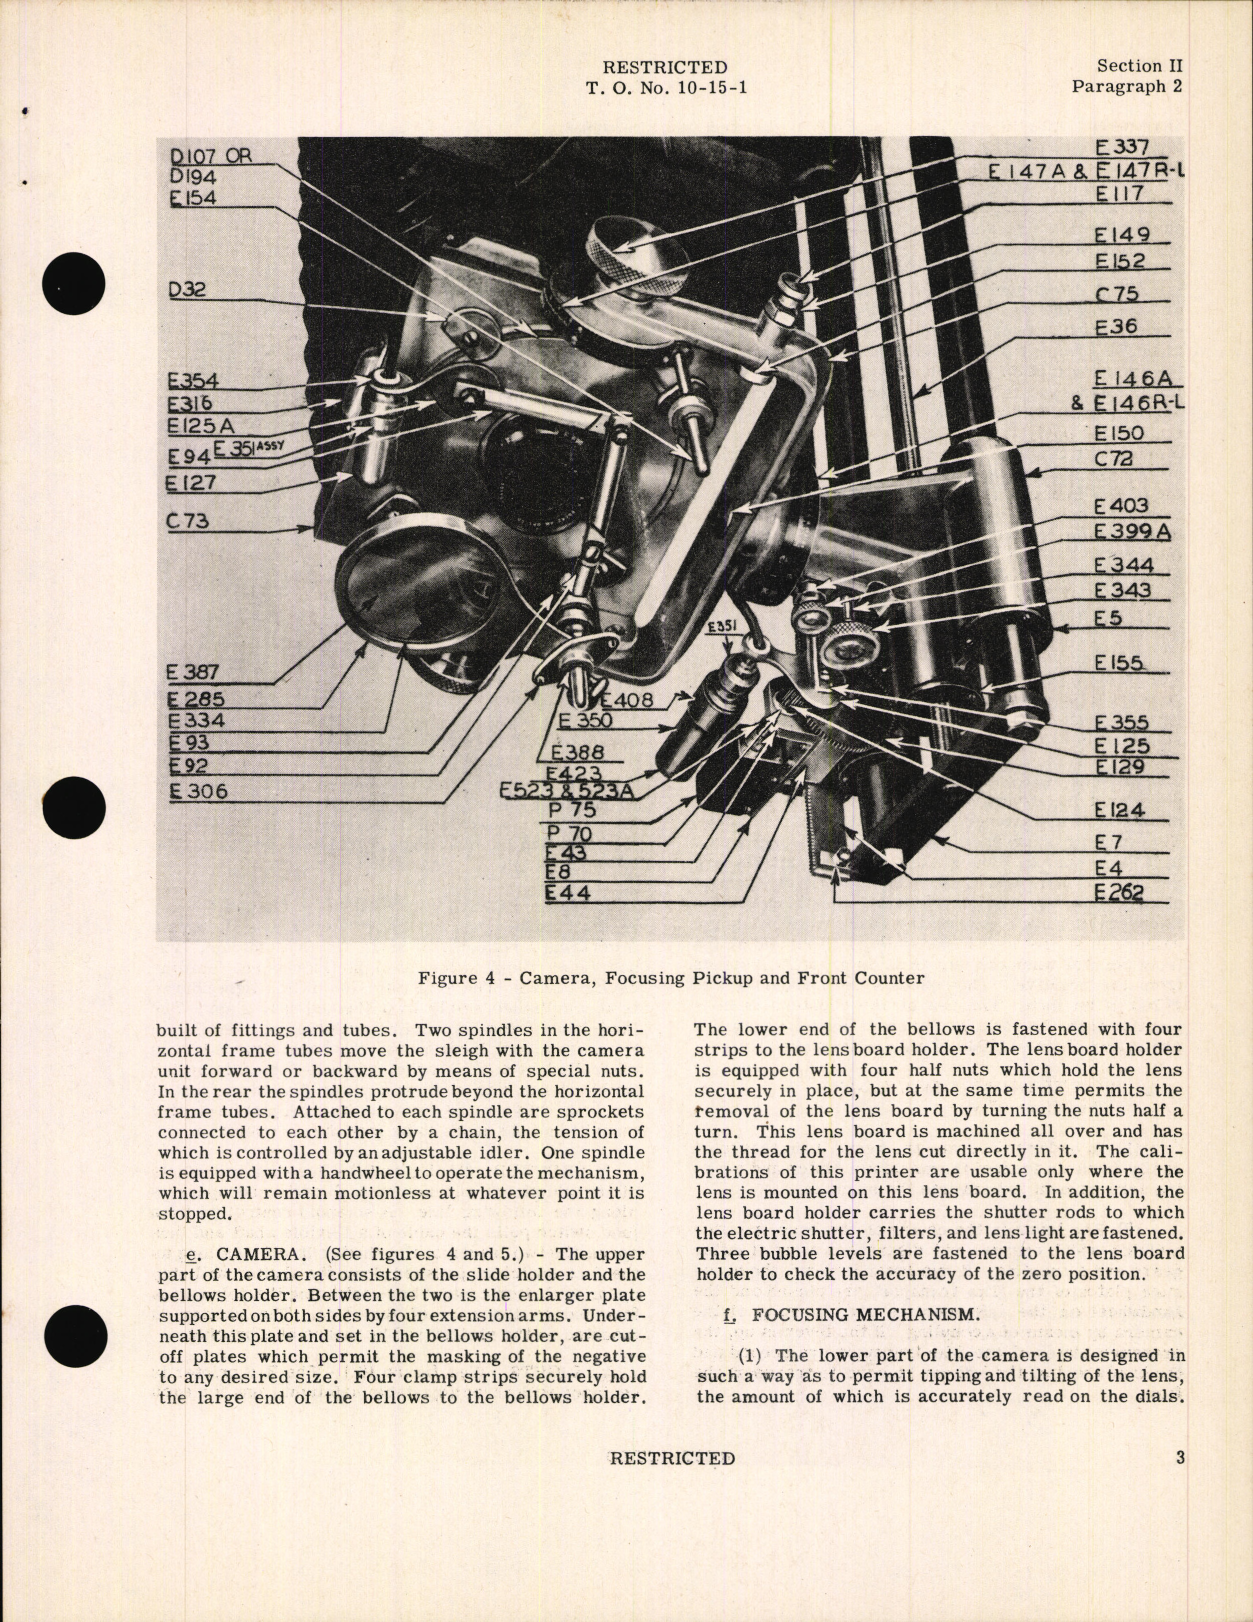 Sample page 5 from AirCorps Library document: Handbook of Instructions with Parts Catalog for Type B-9 Projection Printer